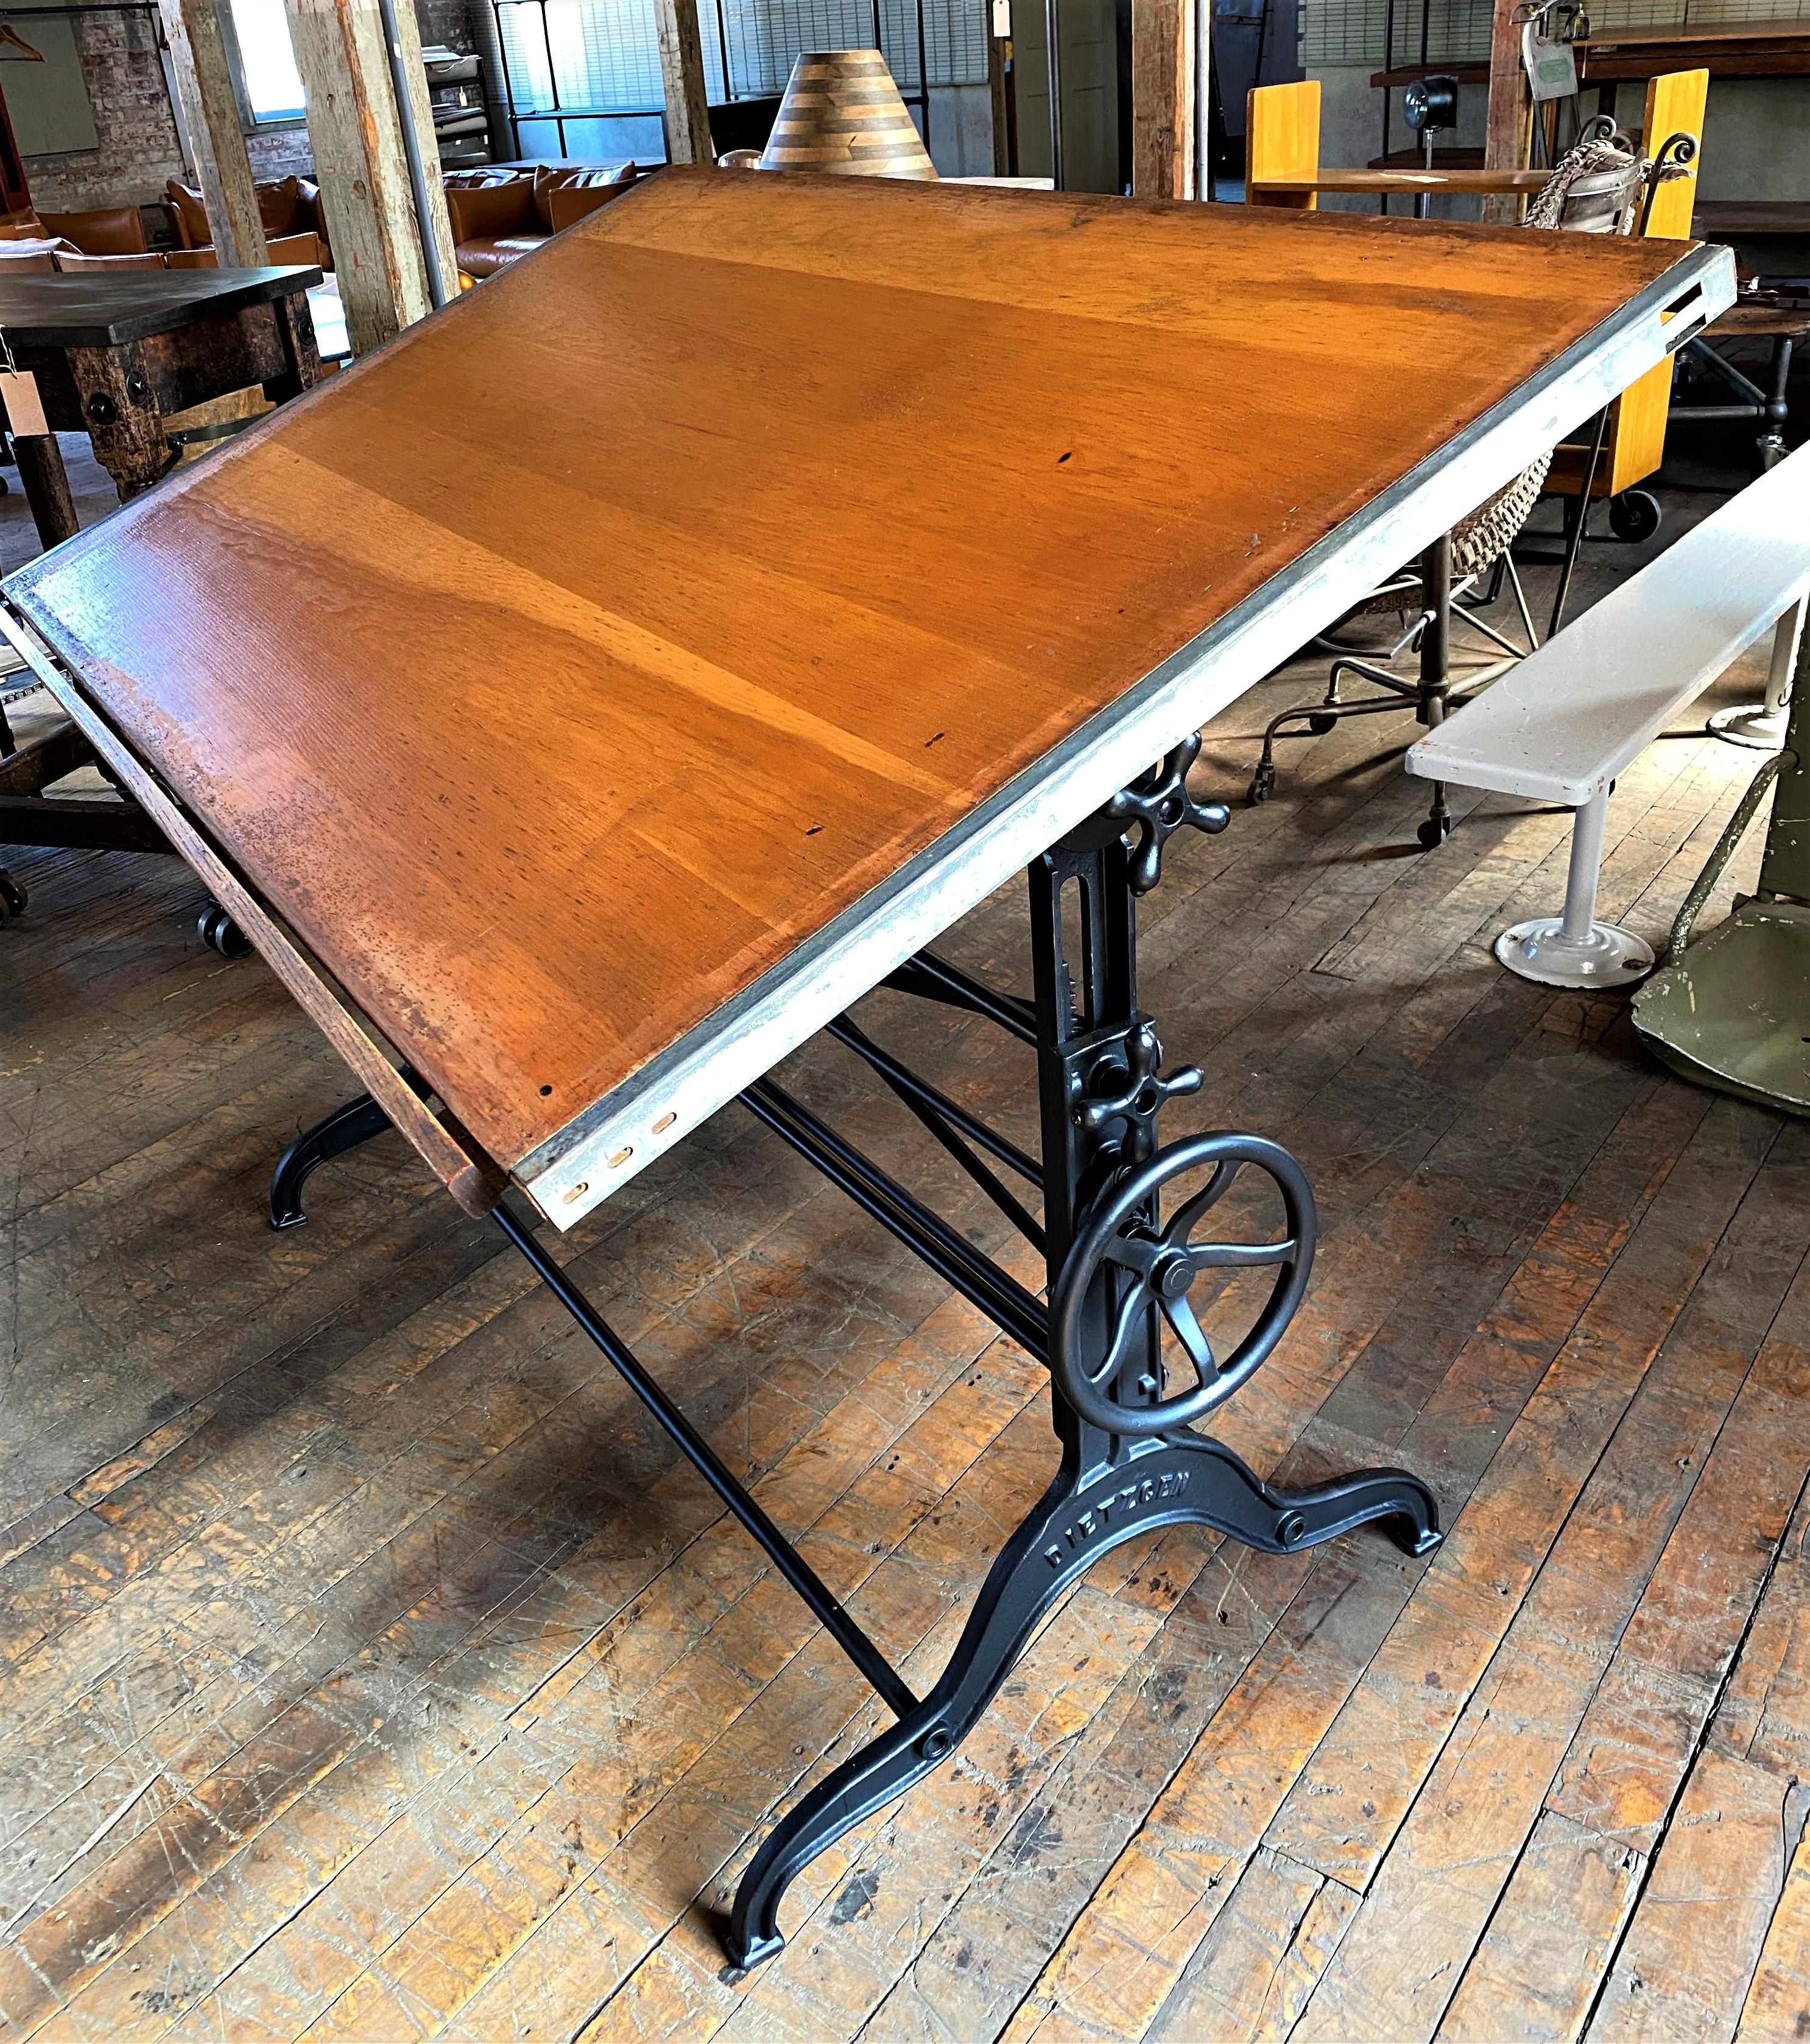 Vintage Dietzgen drafting table

Overall dimensions: 38